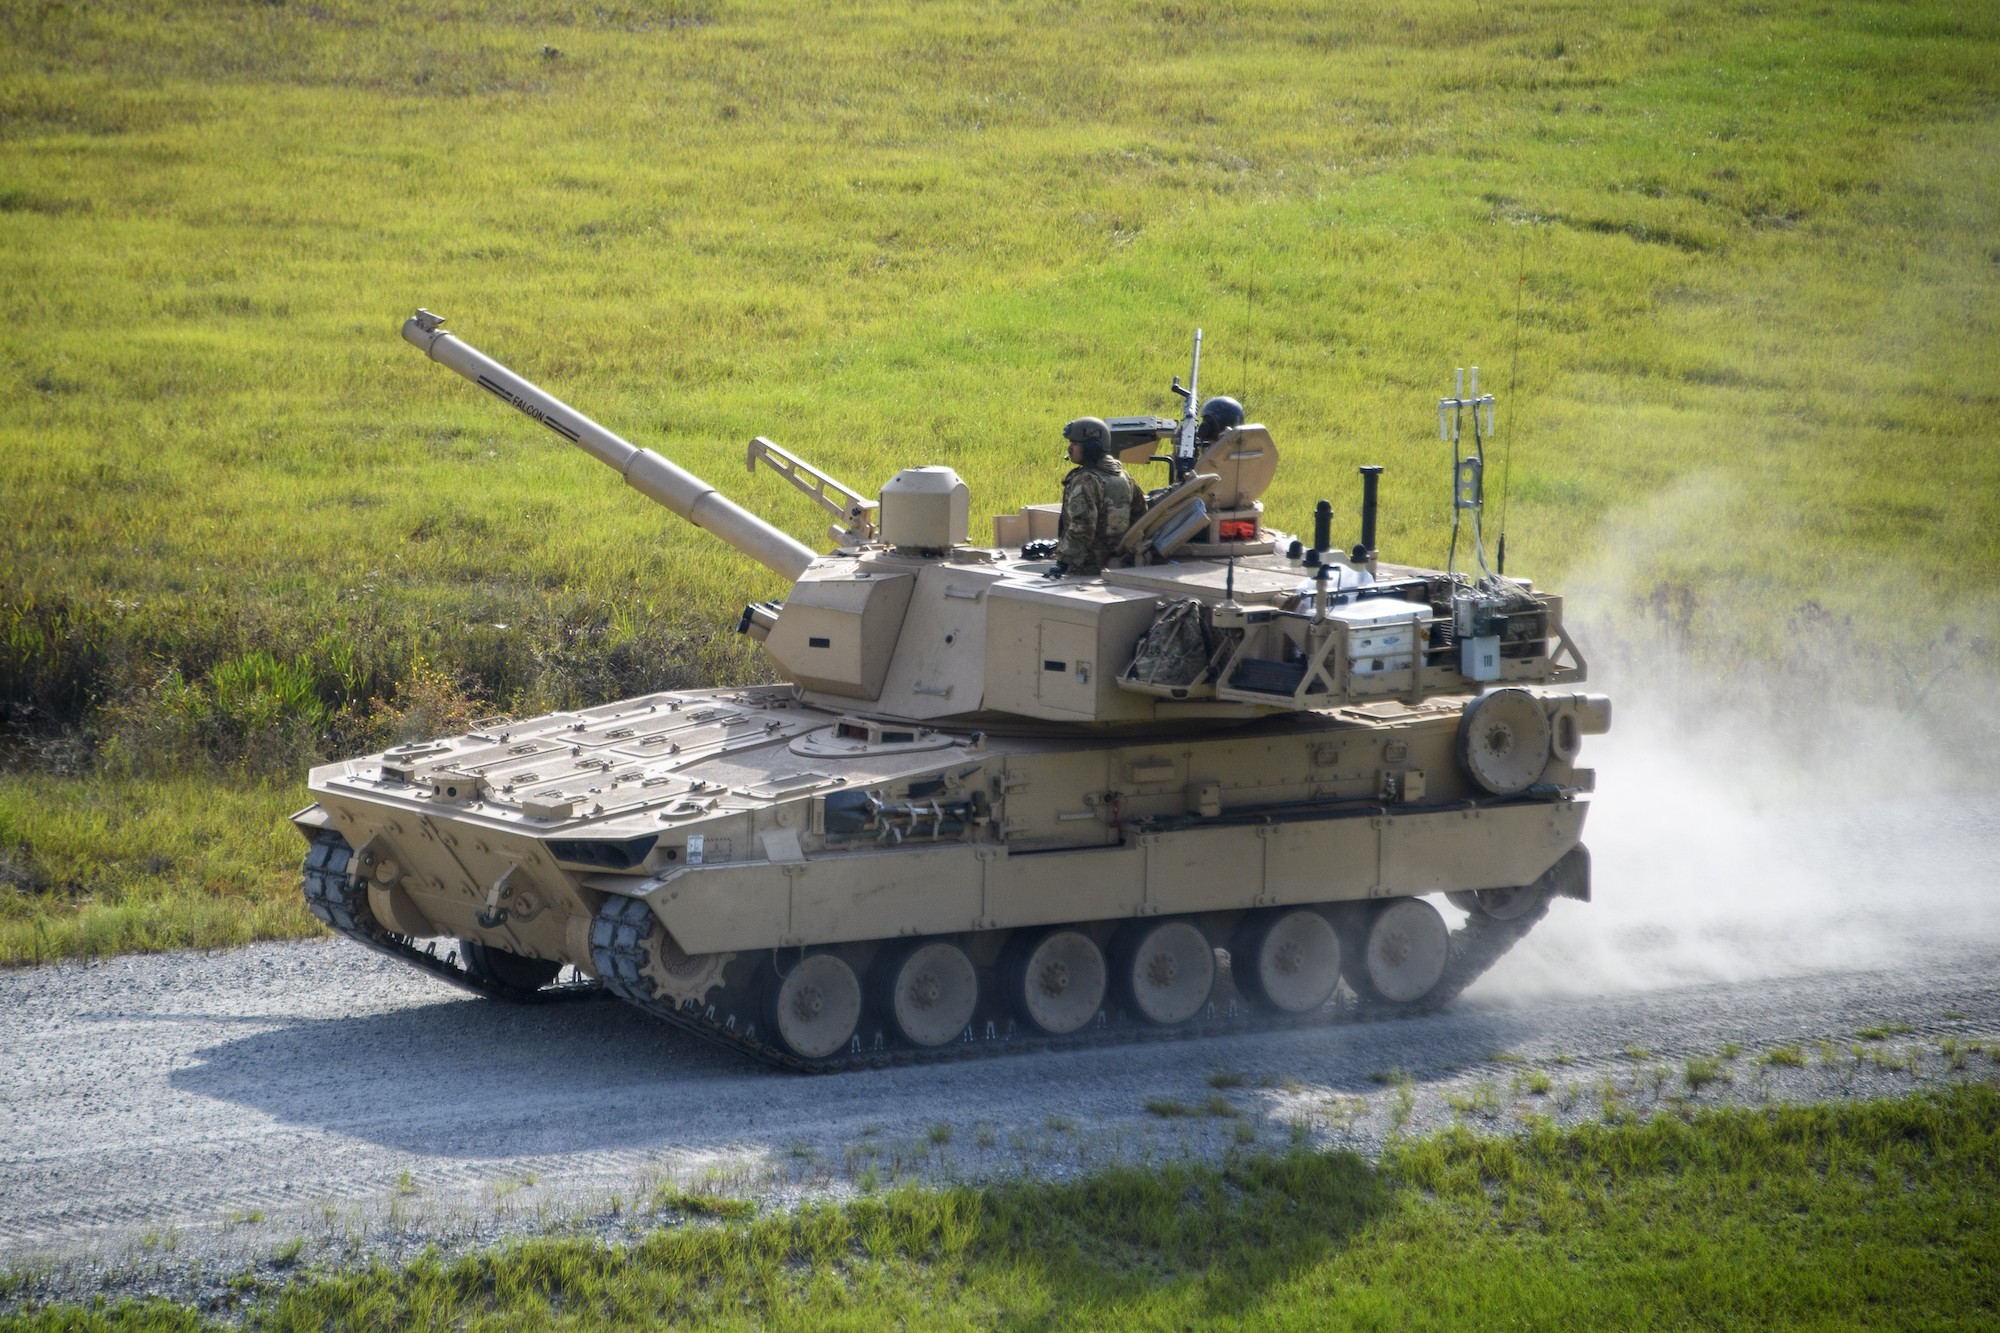 The Army’s new 42-ton assault vehicle has a compelling backstory